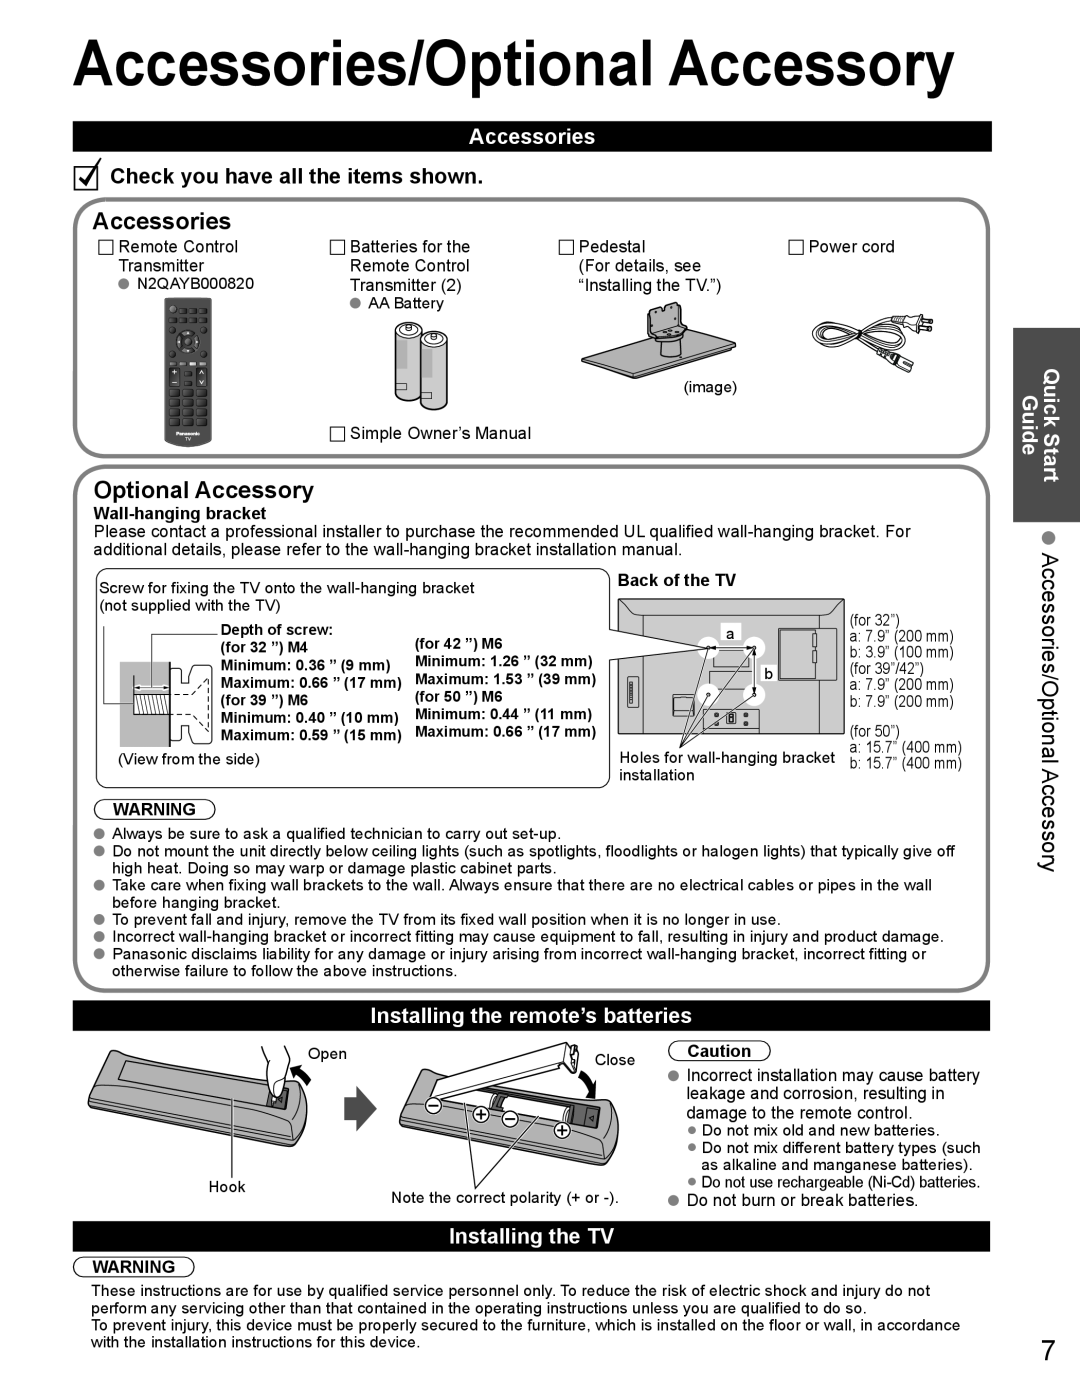 Panasonic TH32LRU60 Optional Accessory, Accessories/Optional, Check you have all the items shown, Quick Start Guide 